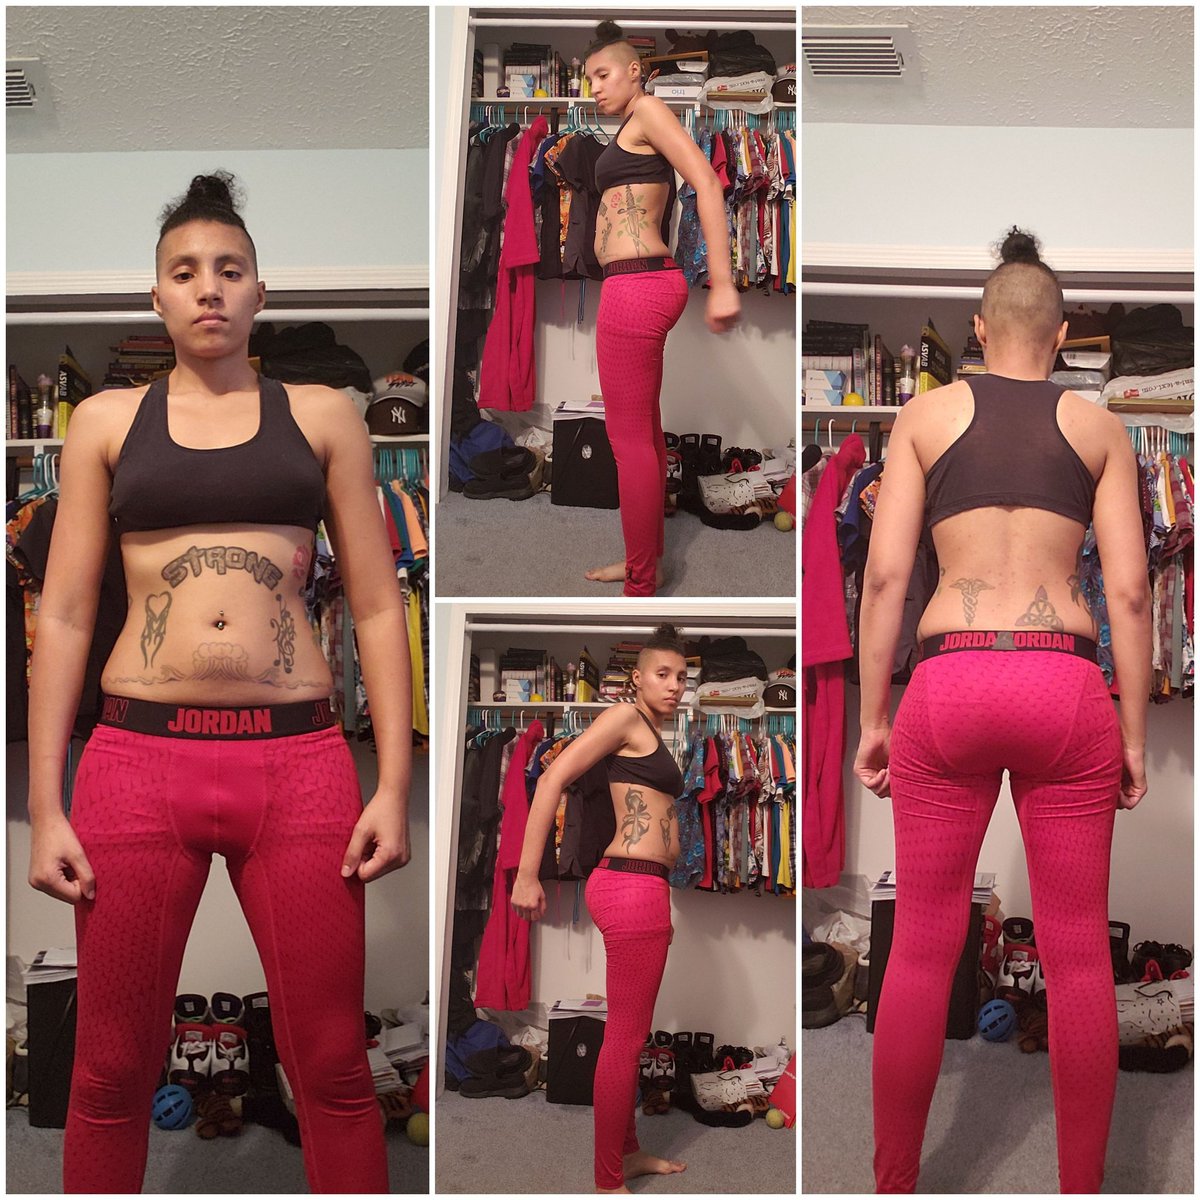 Old but the last time I plan on looking like this 💪🌱
.
.
.
#LGBTQtwitter #twinki #twospirit #hybrid #mixed #shavedhead #sportsbra #tattoos #tatted #piercings #compressionpants #personaltrainer #workout #exercise #fitness #physicalactivity #bodybuilding #vegan #crueltyfree